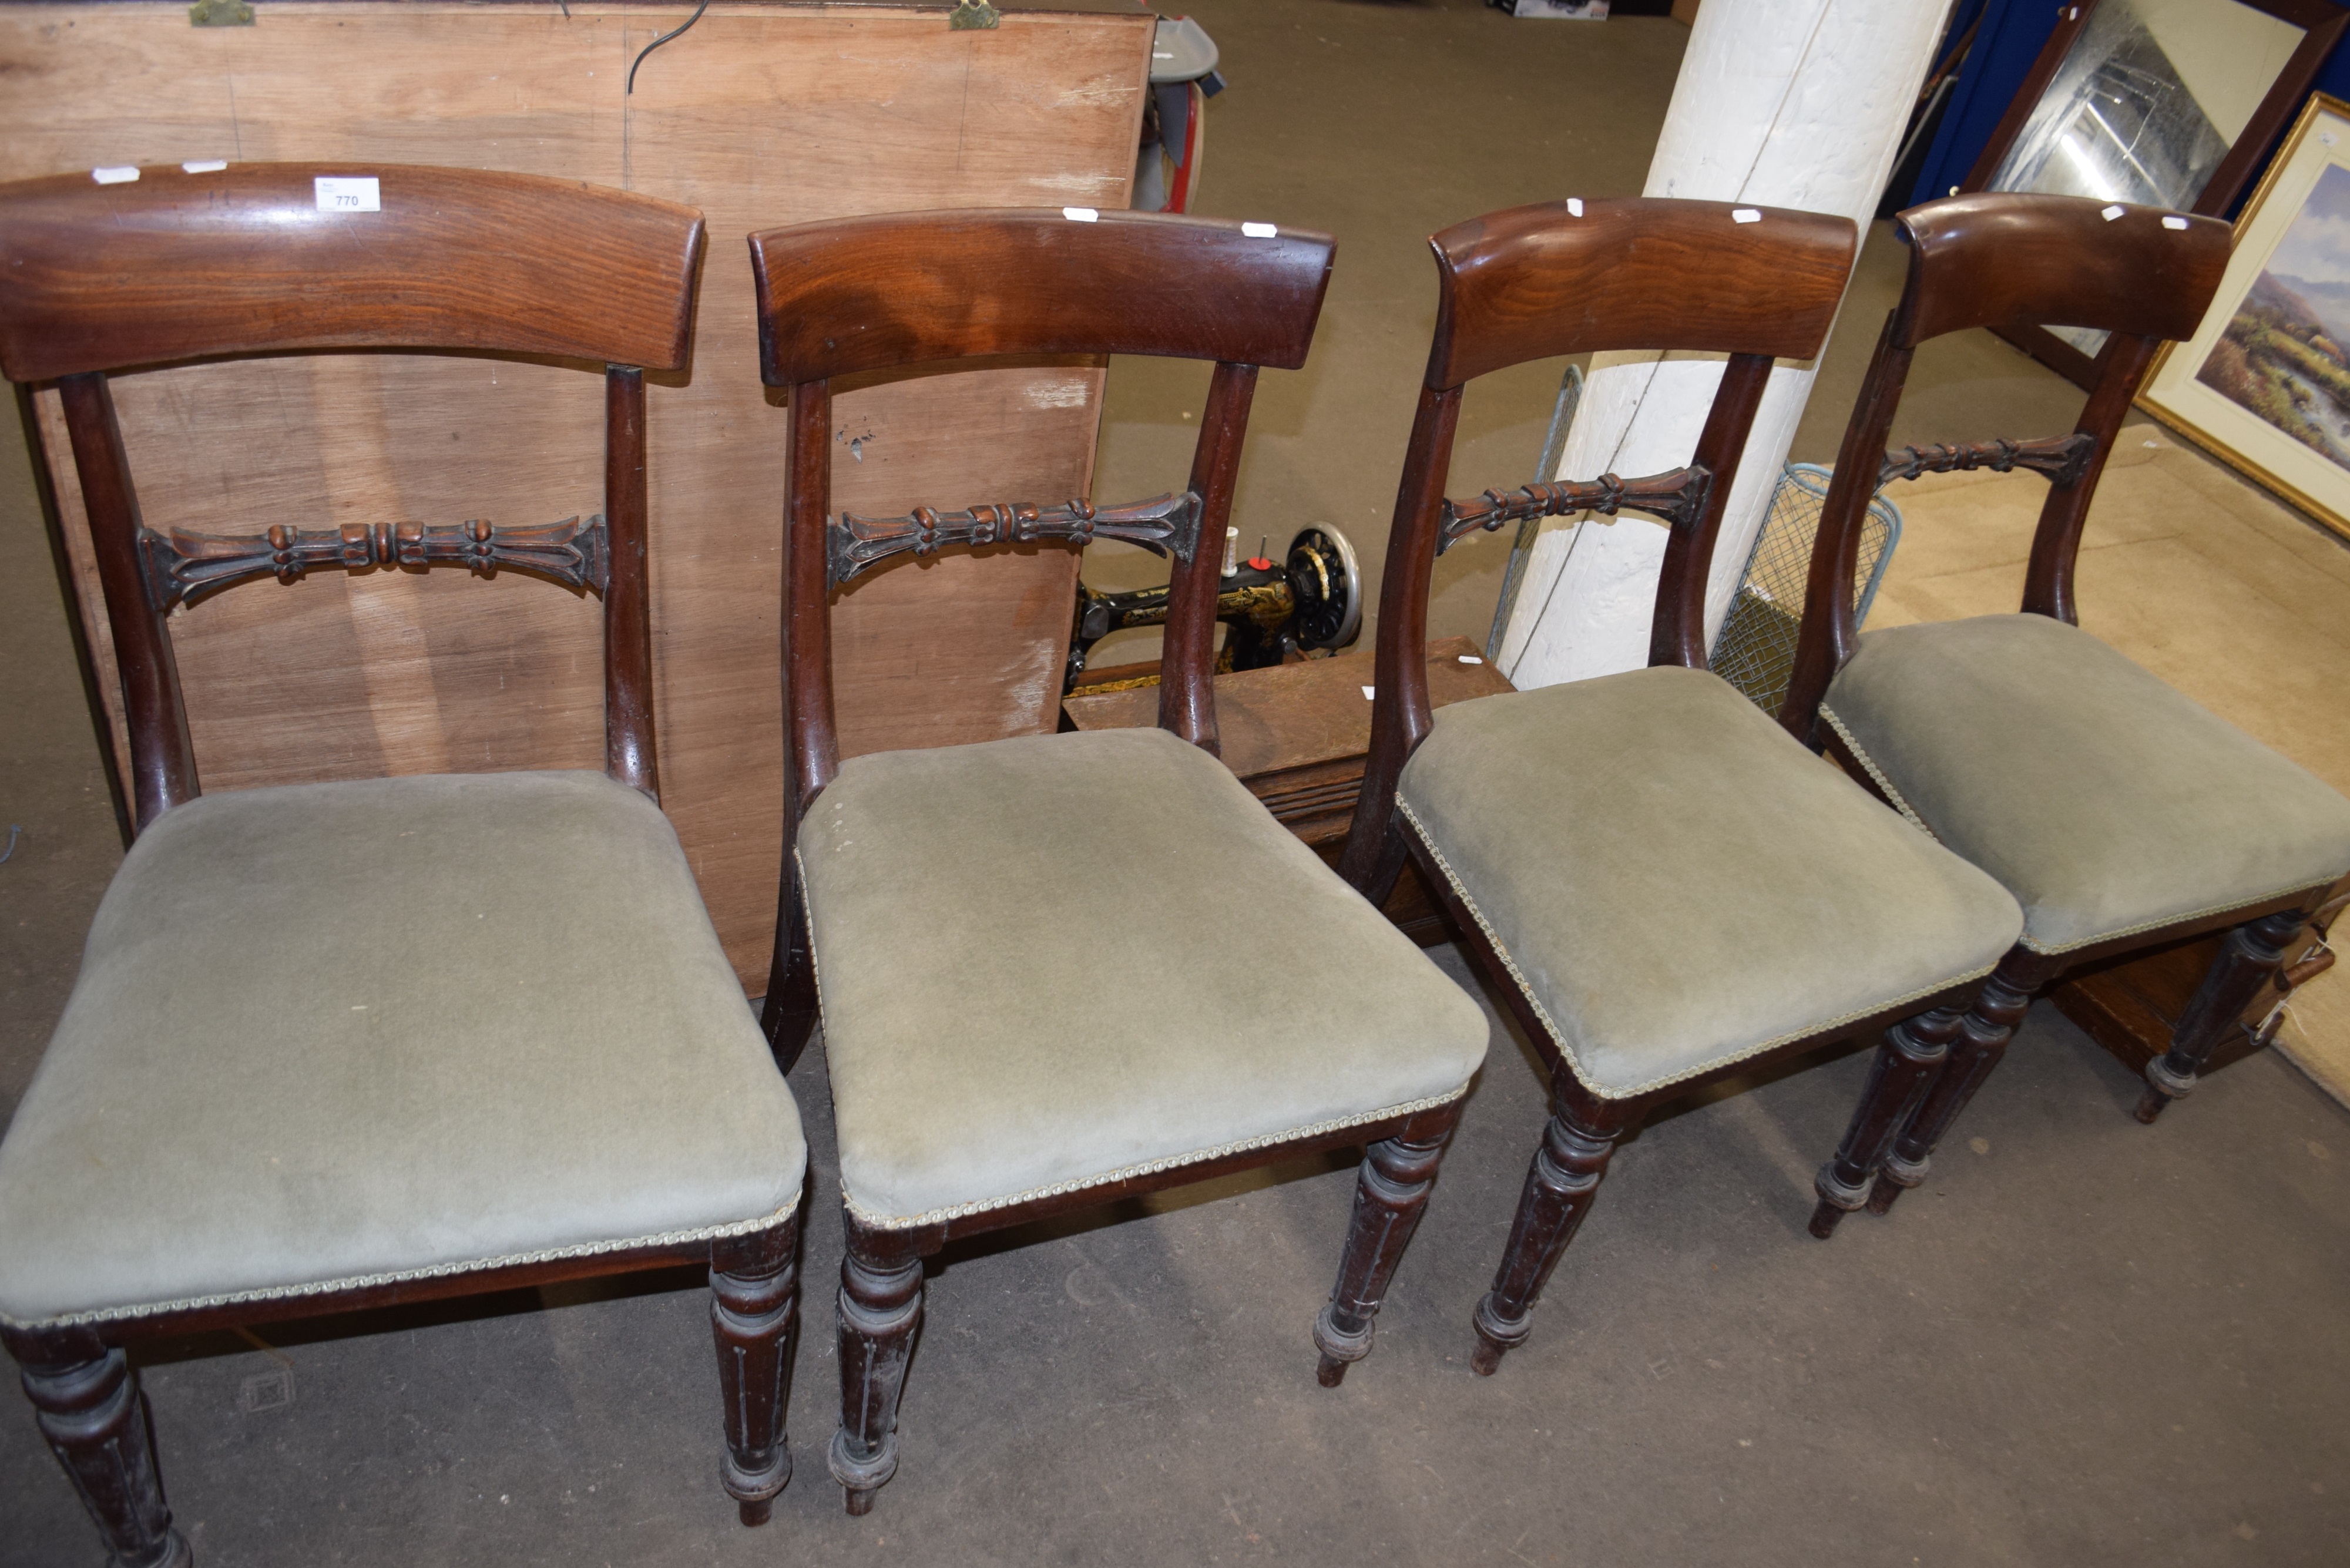 Set of four 19th Century mahogany bar back dining chairs